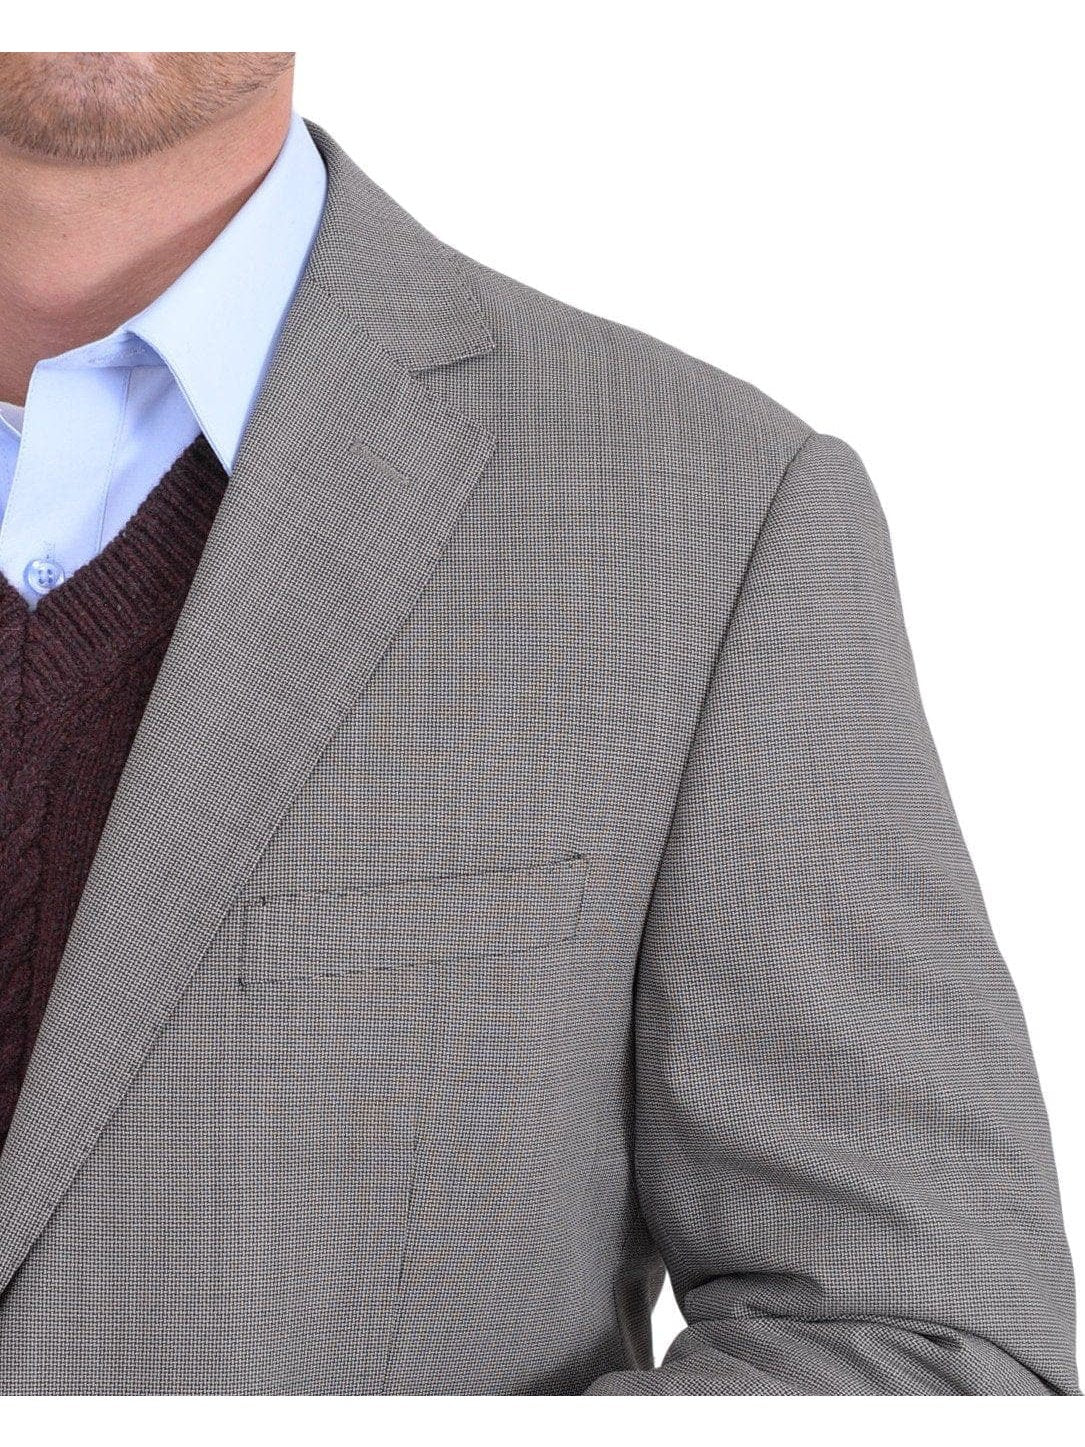 Label M BLAZERS Classic Fit Taupe Brown Basketweave Two Button Wool Blazer Sportcoat